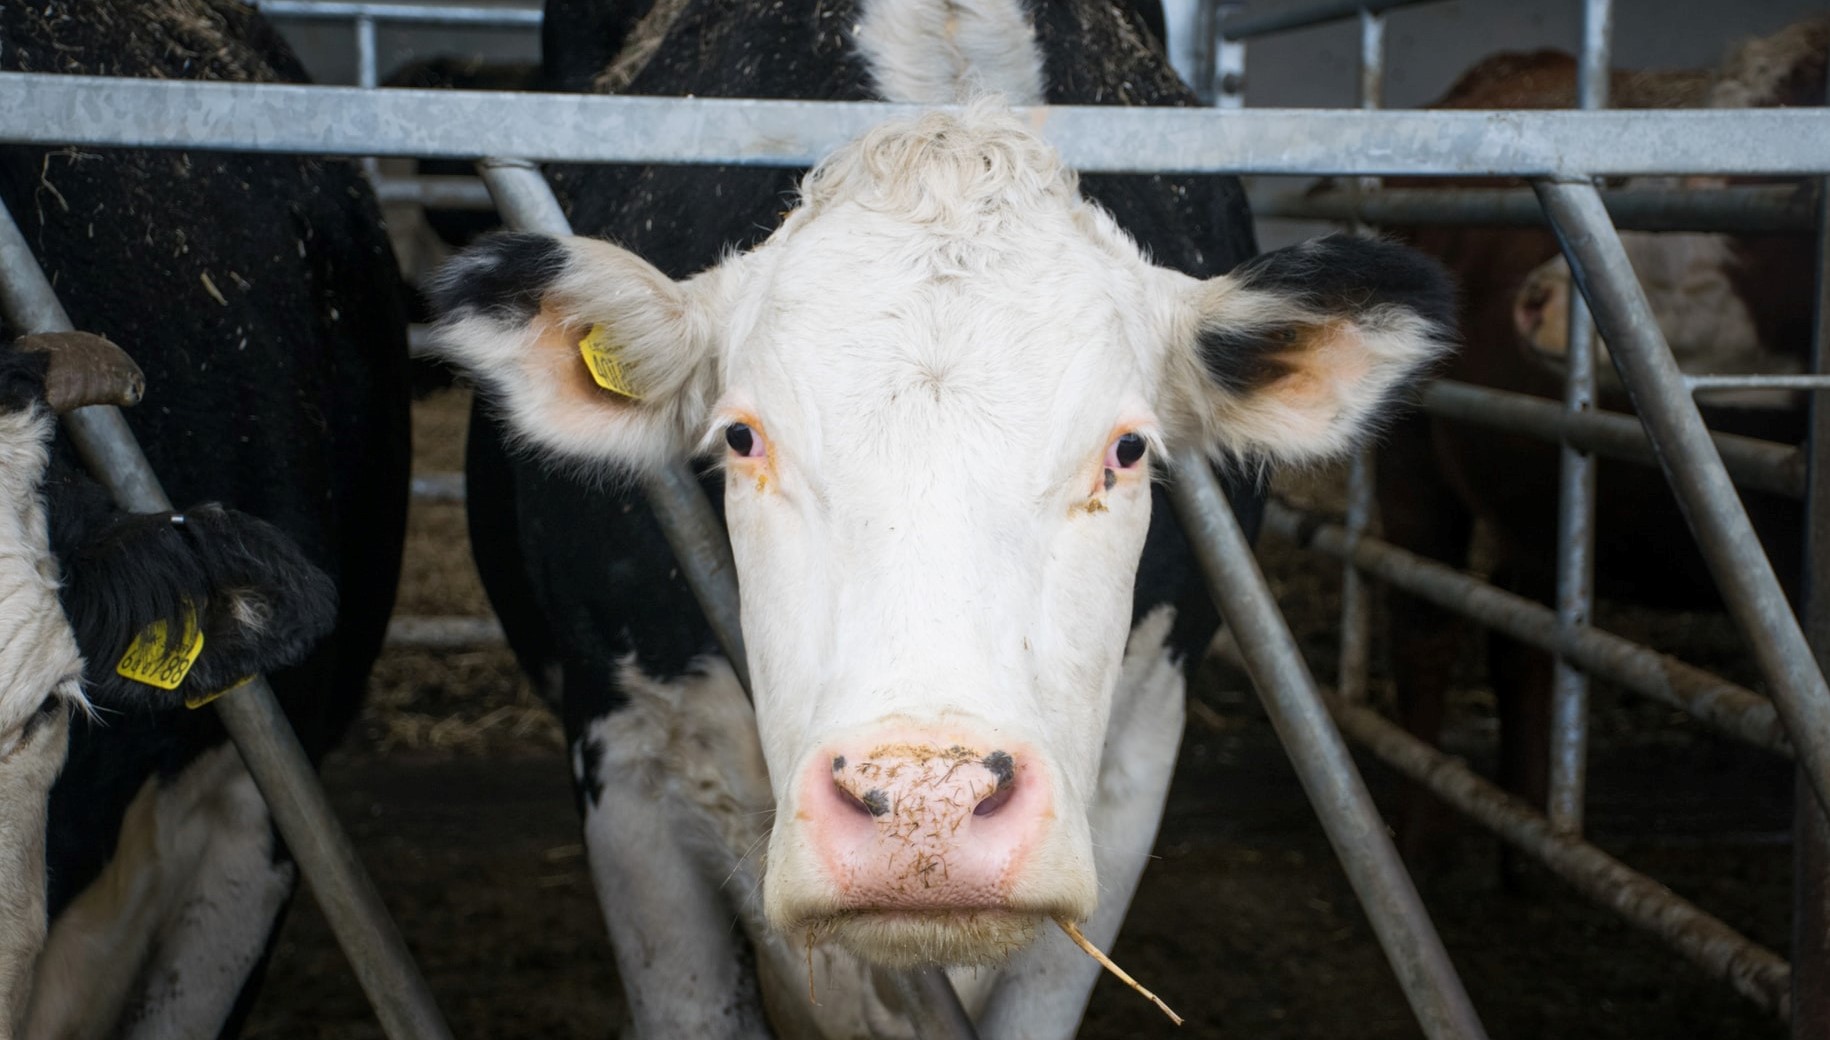 YARNIIZhK recommends Dairy Production Analytics - S4A